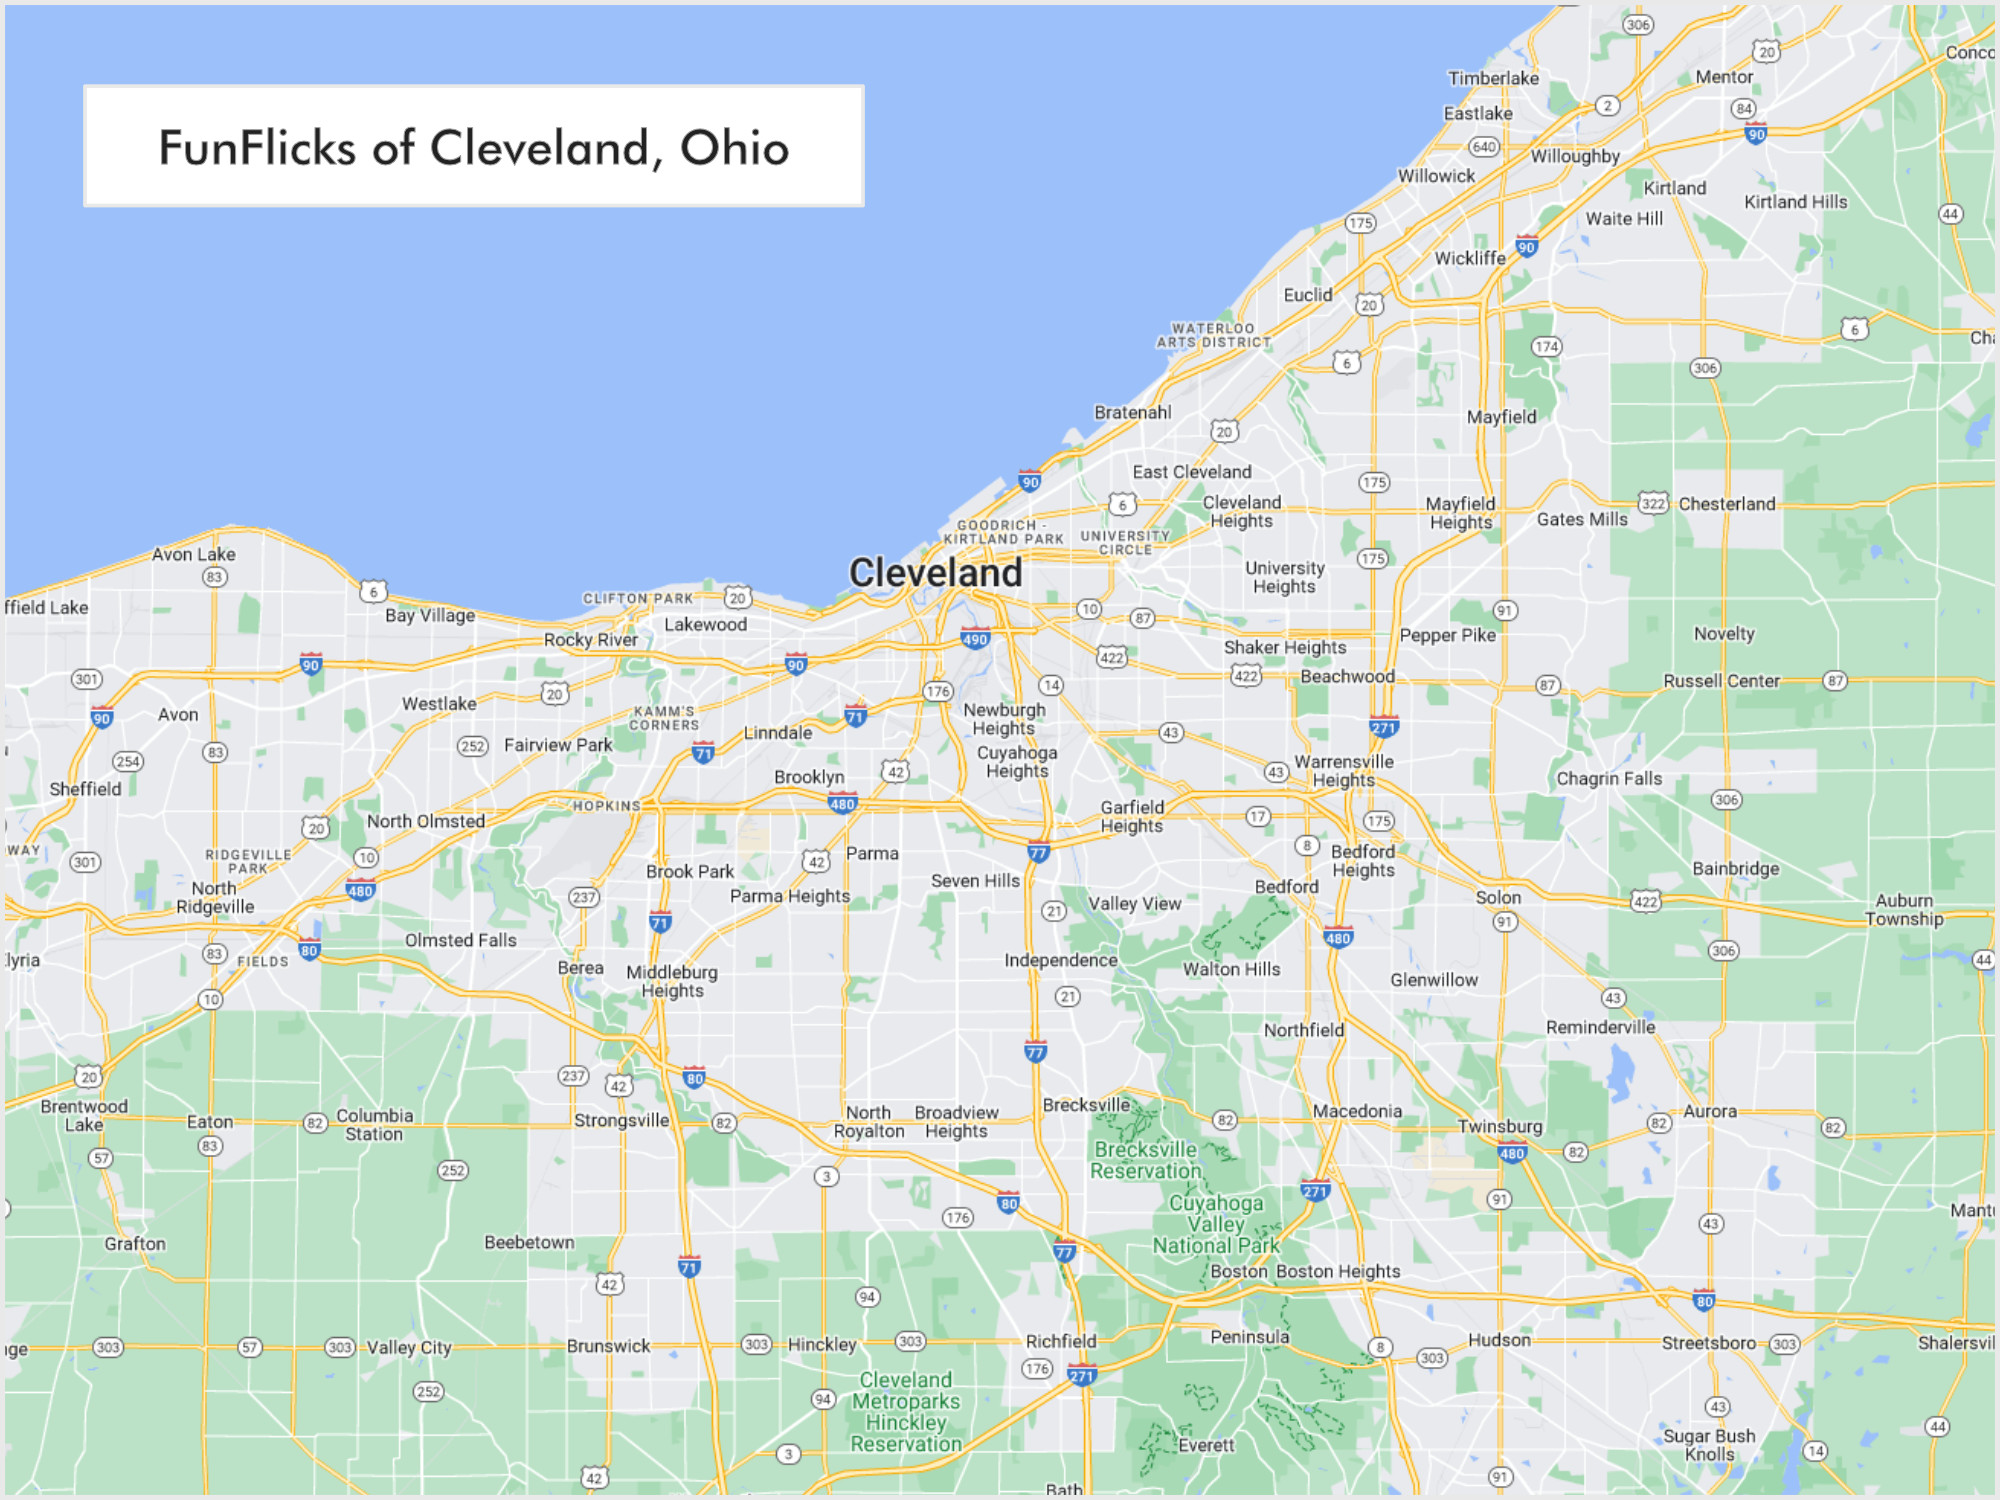 FunFlicks® Cleveland territory map